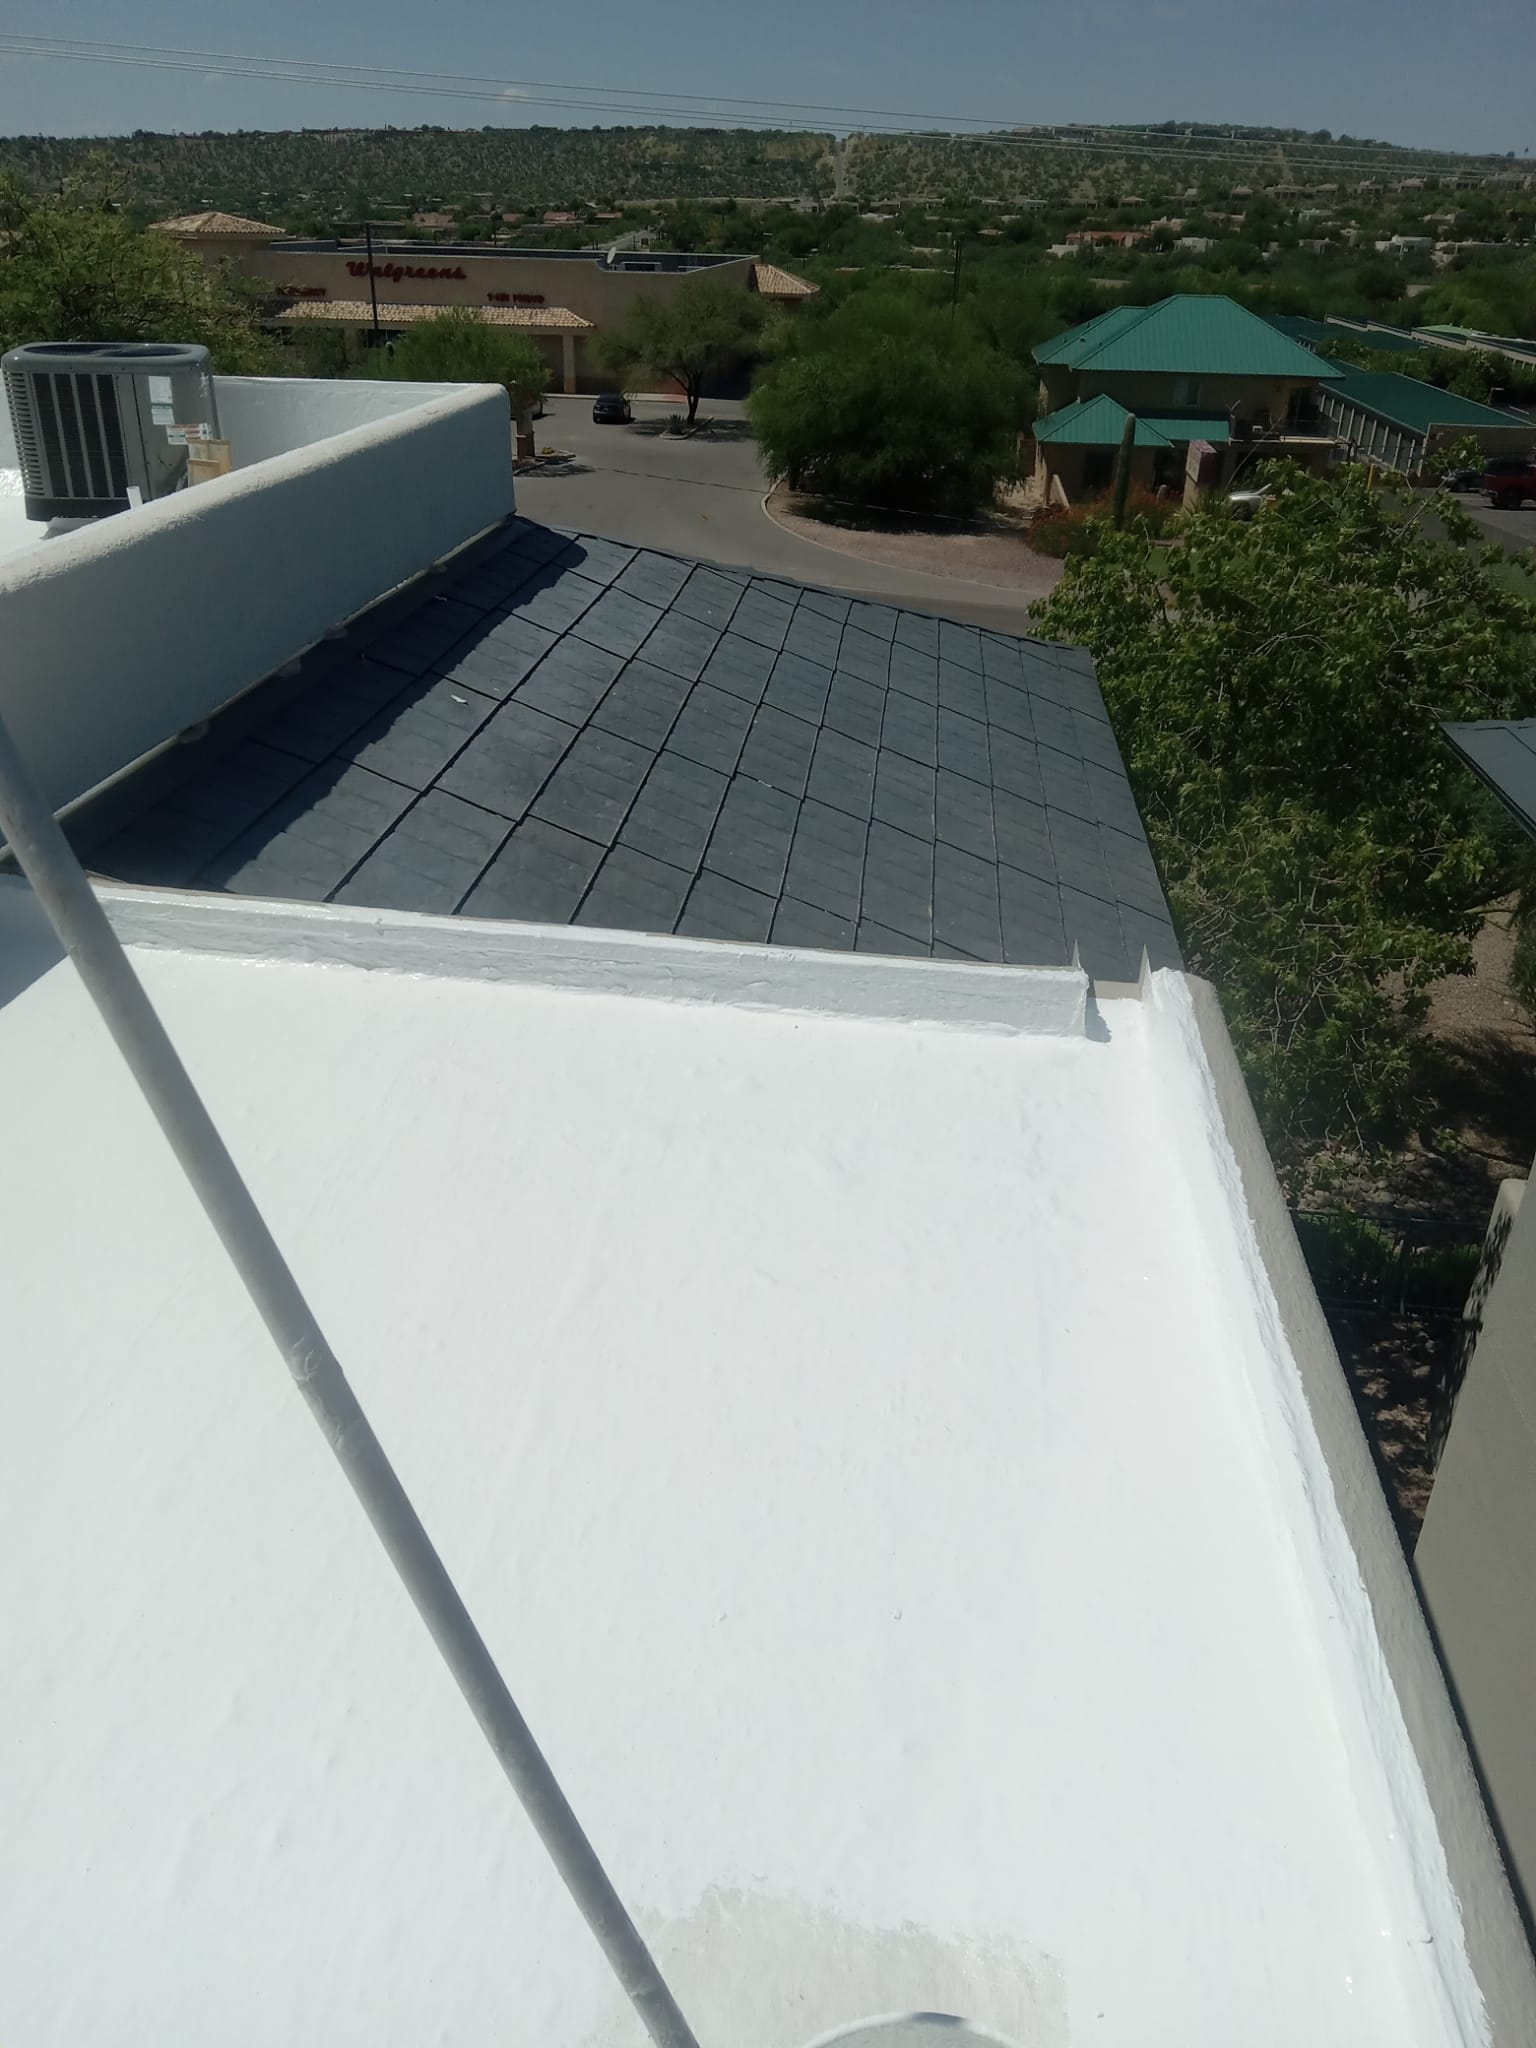 Freshly applied spray foam on a residential roof in Desert Ridge, showcasing a clean, white surface for improved insulation.